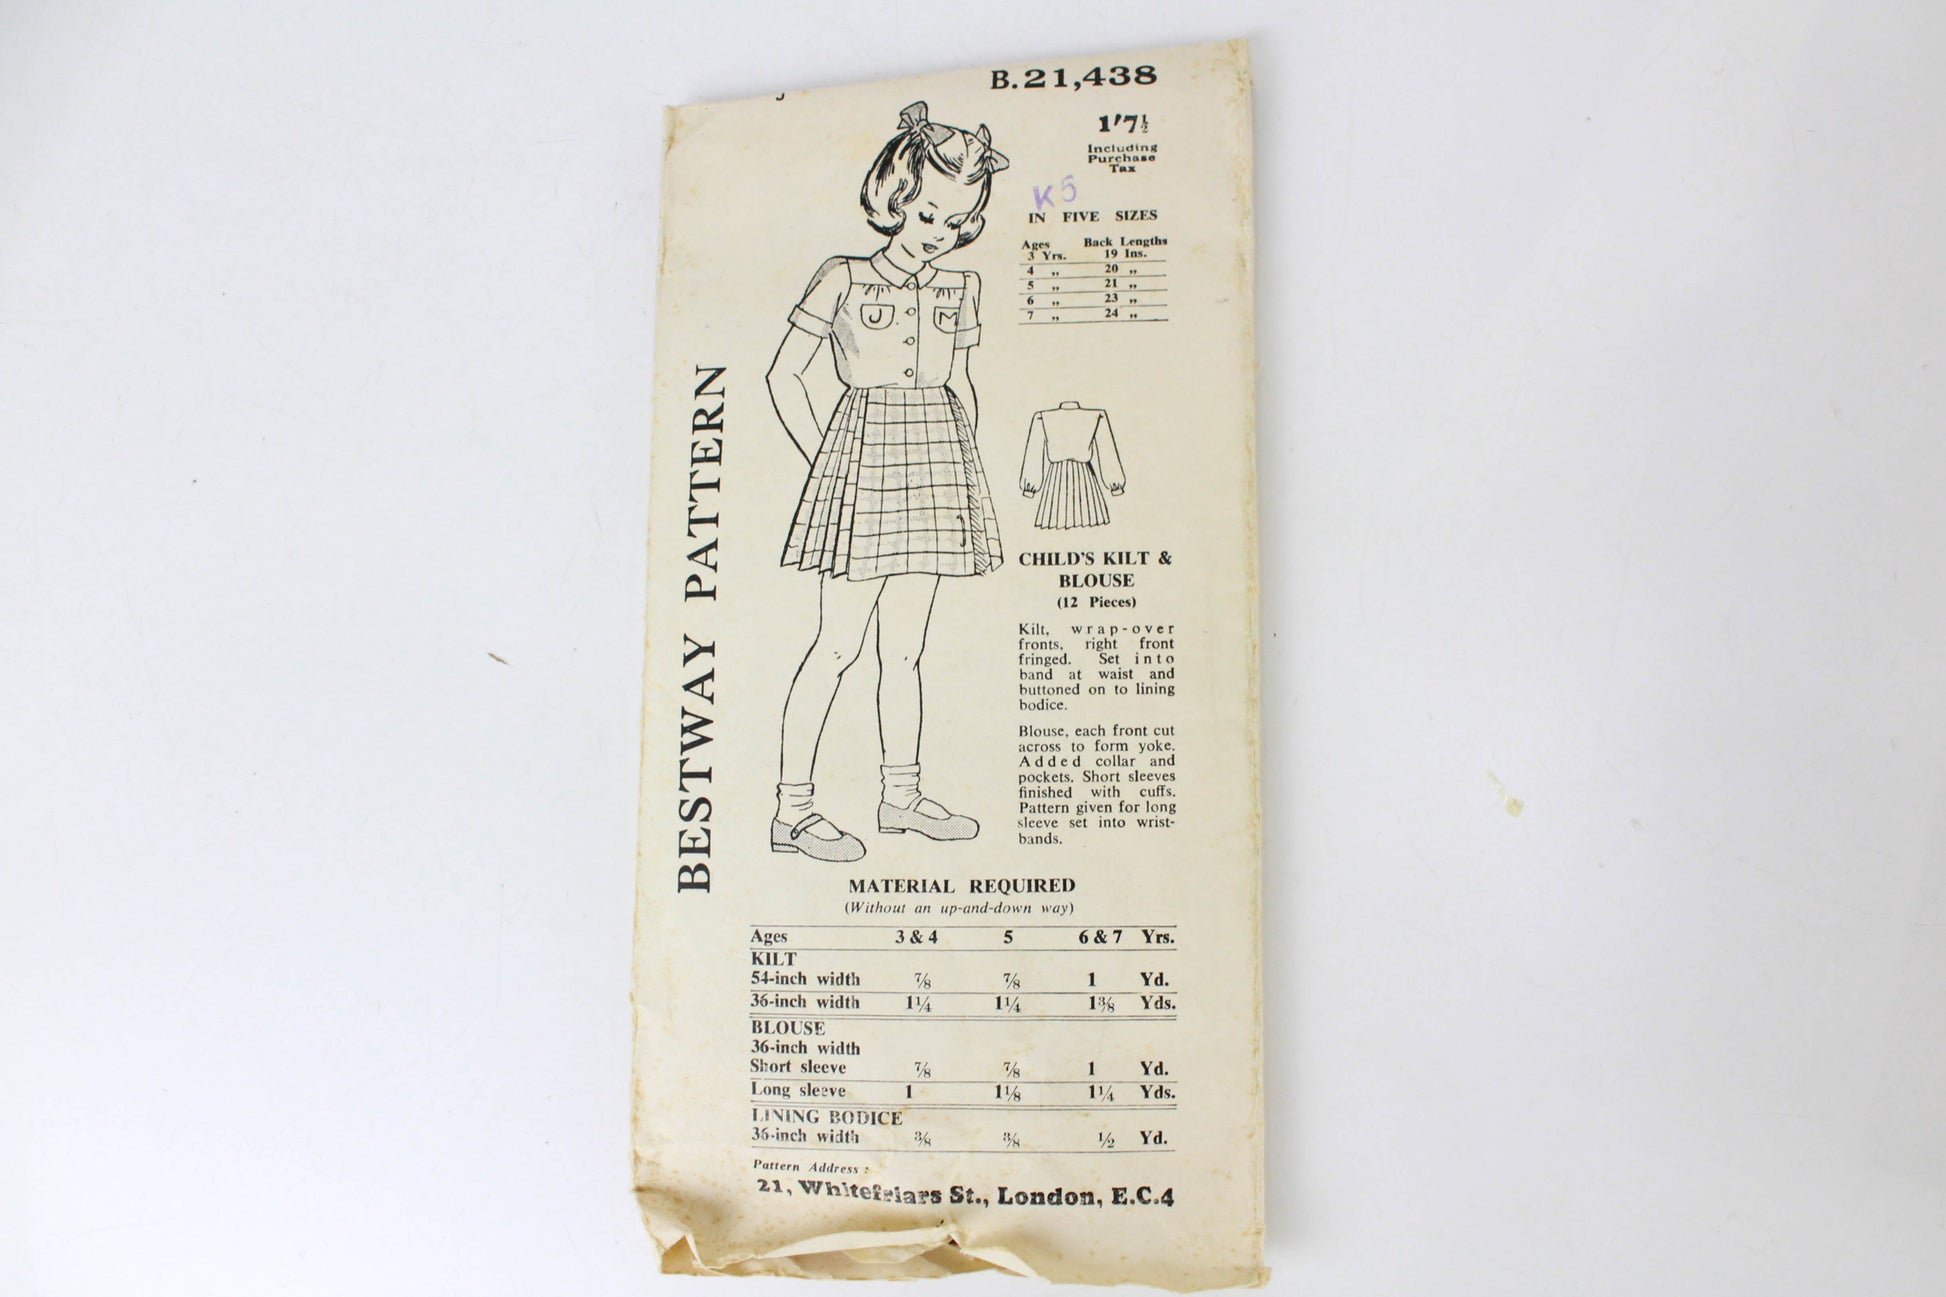 Bestway 21,438; ca. 1940s; Children's Kilt & Blouse; Kilt, wrap-over fronts, right front fringed. Set into band at waist and buttoned on to lining bodice. Blouse, each front cut across to form yoke. Added collar and pockets. Short sleeves finished with cuffs. Pattern given for long sleeve set into wristbands.   LABEL: Bestway  Style #21,438  MEASUREMENTS: ✂--- Allow for some ease.  7 Years: Finished length: 24 in. (61 cm)  CONDITION: Complete. Cut. Unprinted pieces. Instructions on envelope. 